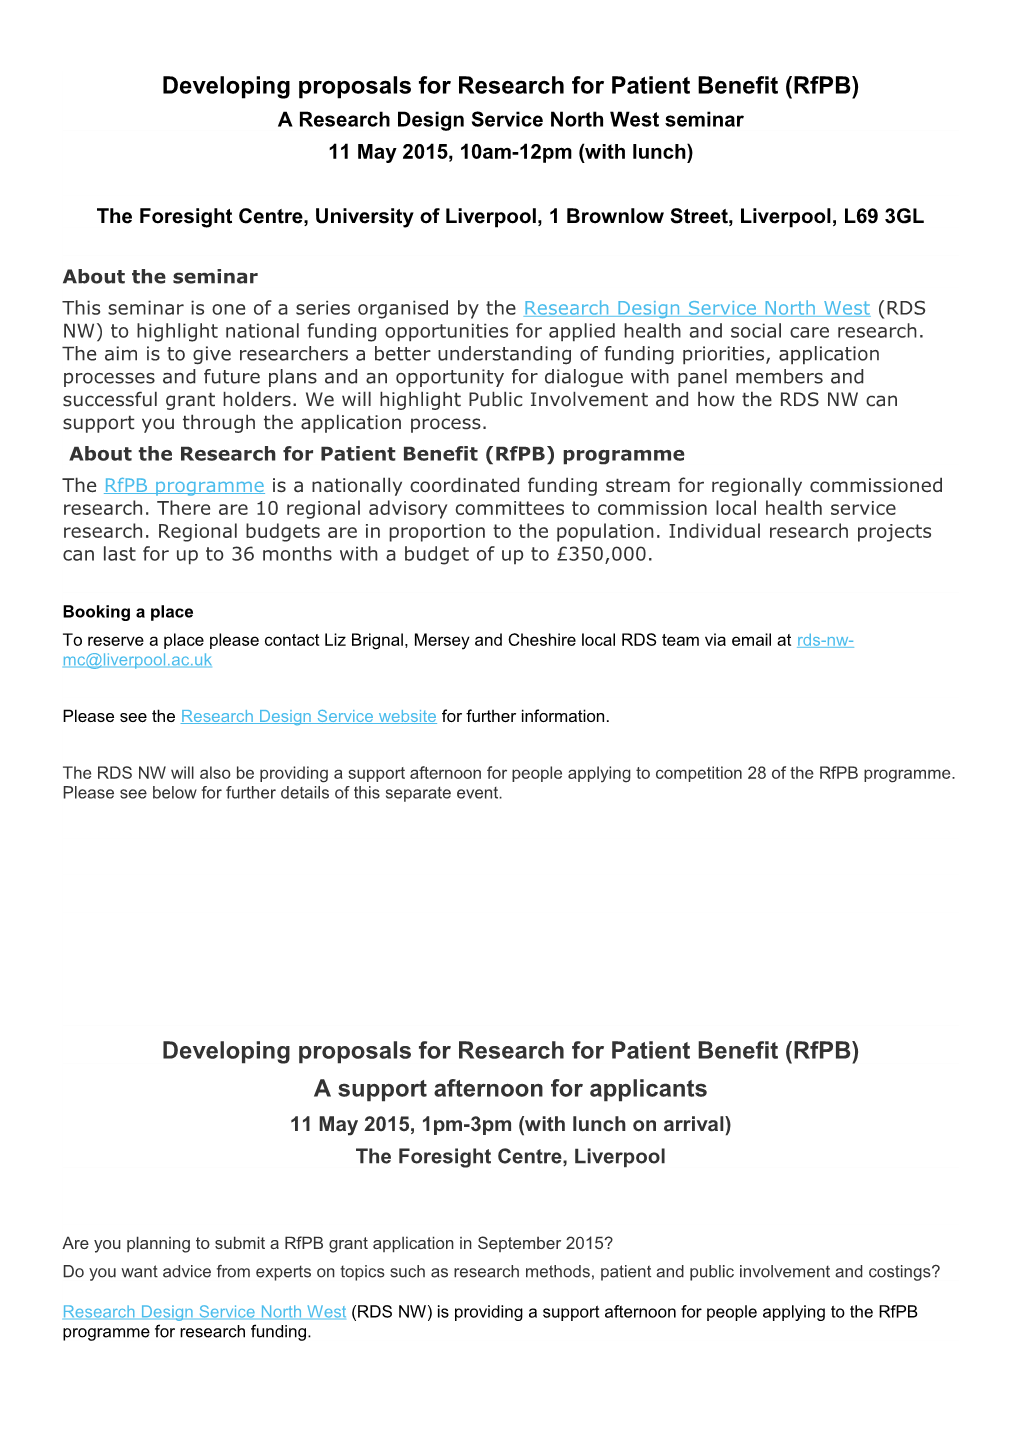 Developing Proposals for Research for Patient Benefit (Rfpb)